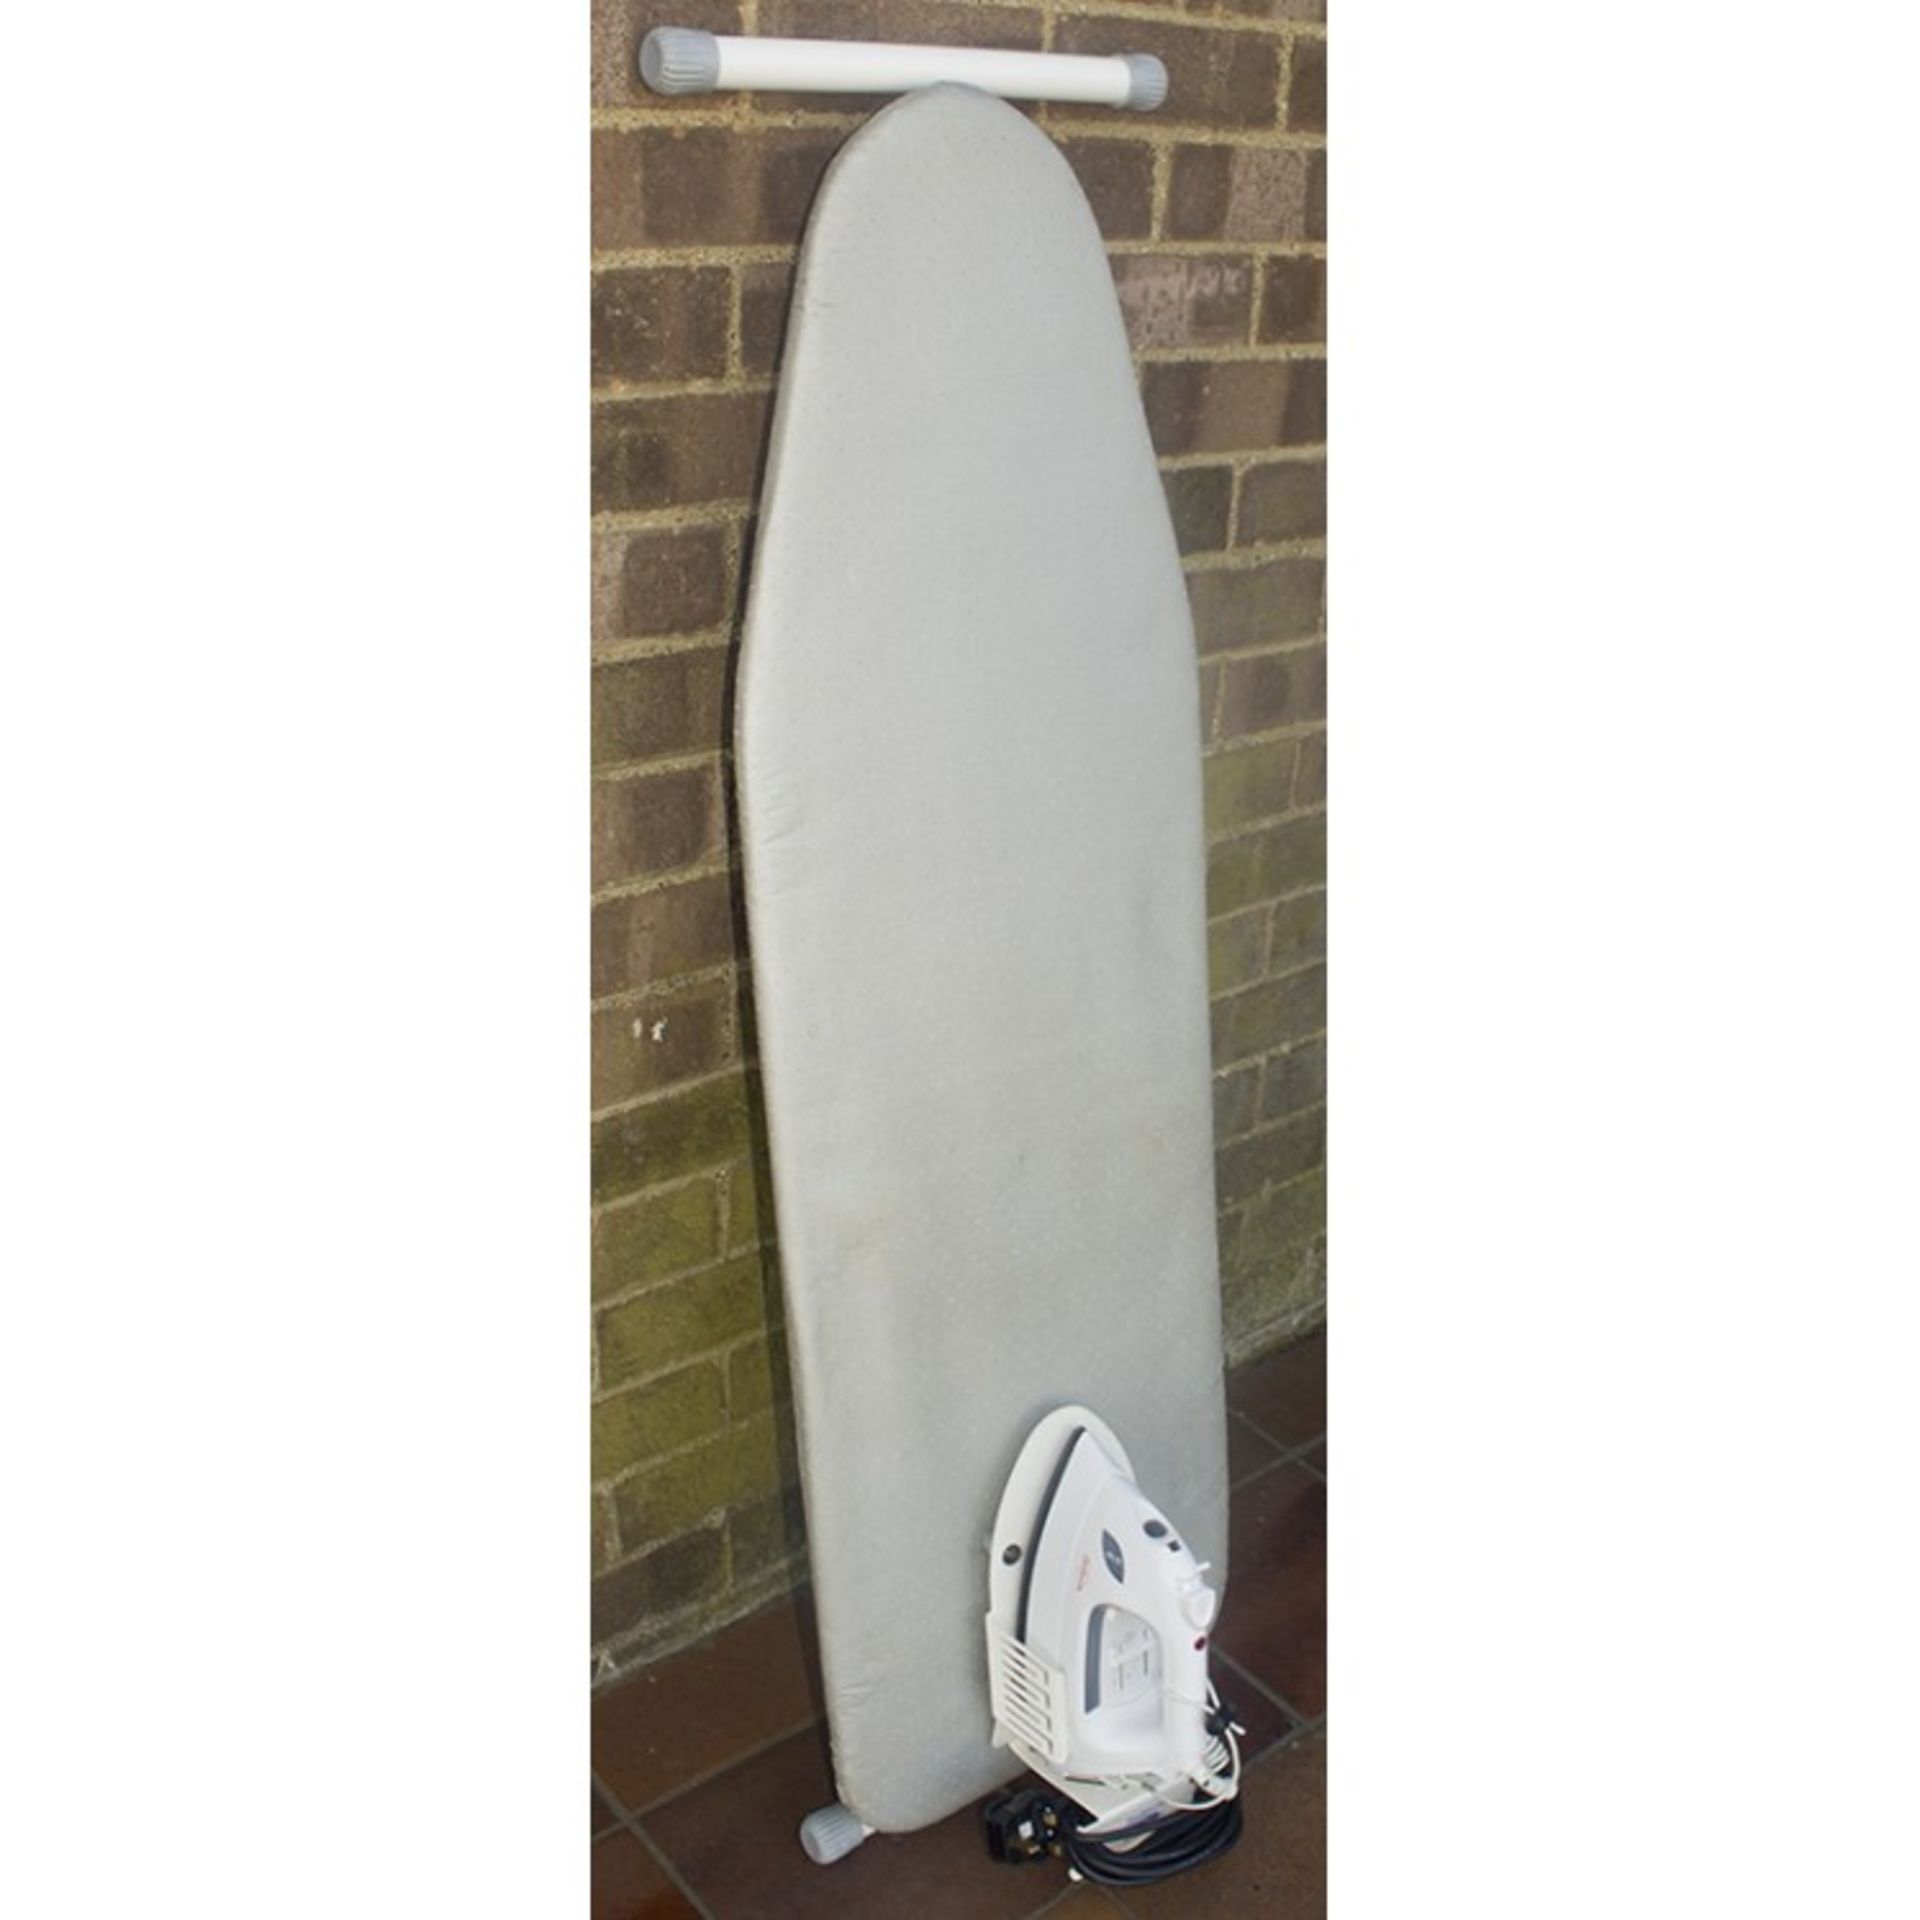 100 x  Iron Board With Iron

Ex Hotel Iron with ironing board, Prevents Iron Burn Damage and Iron - Image 4 of 4